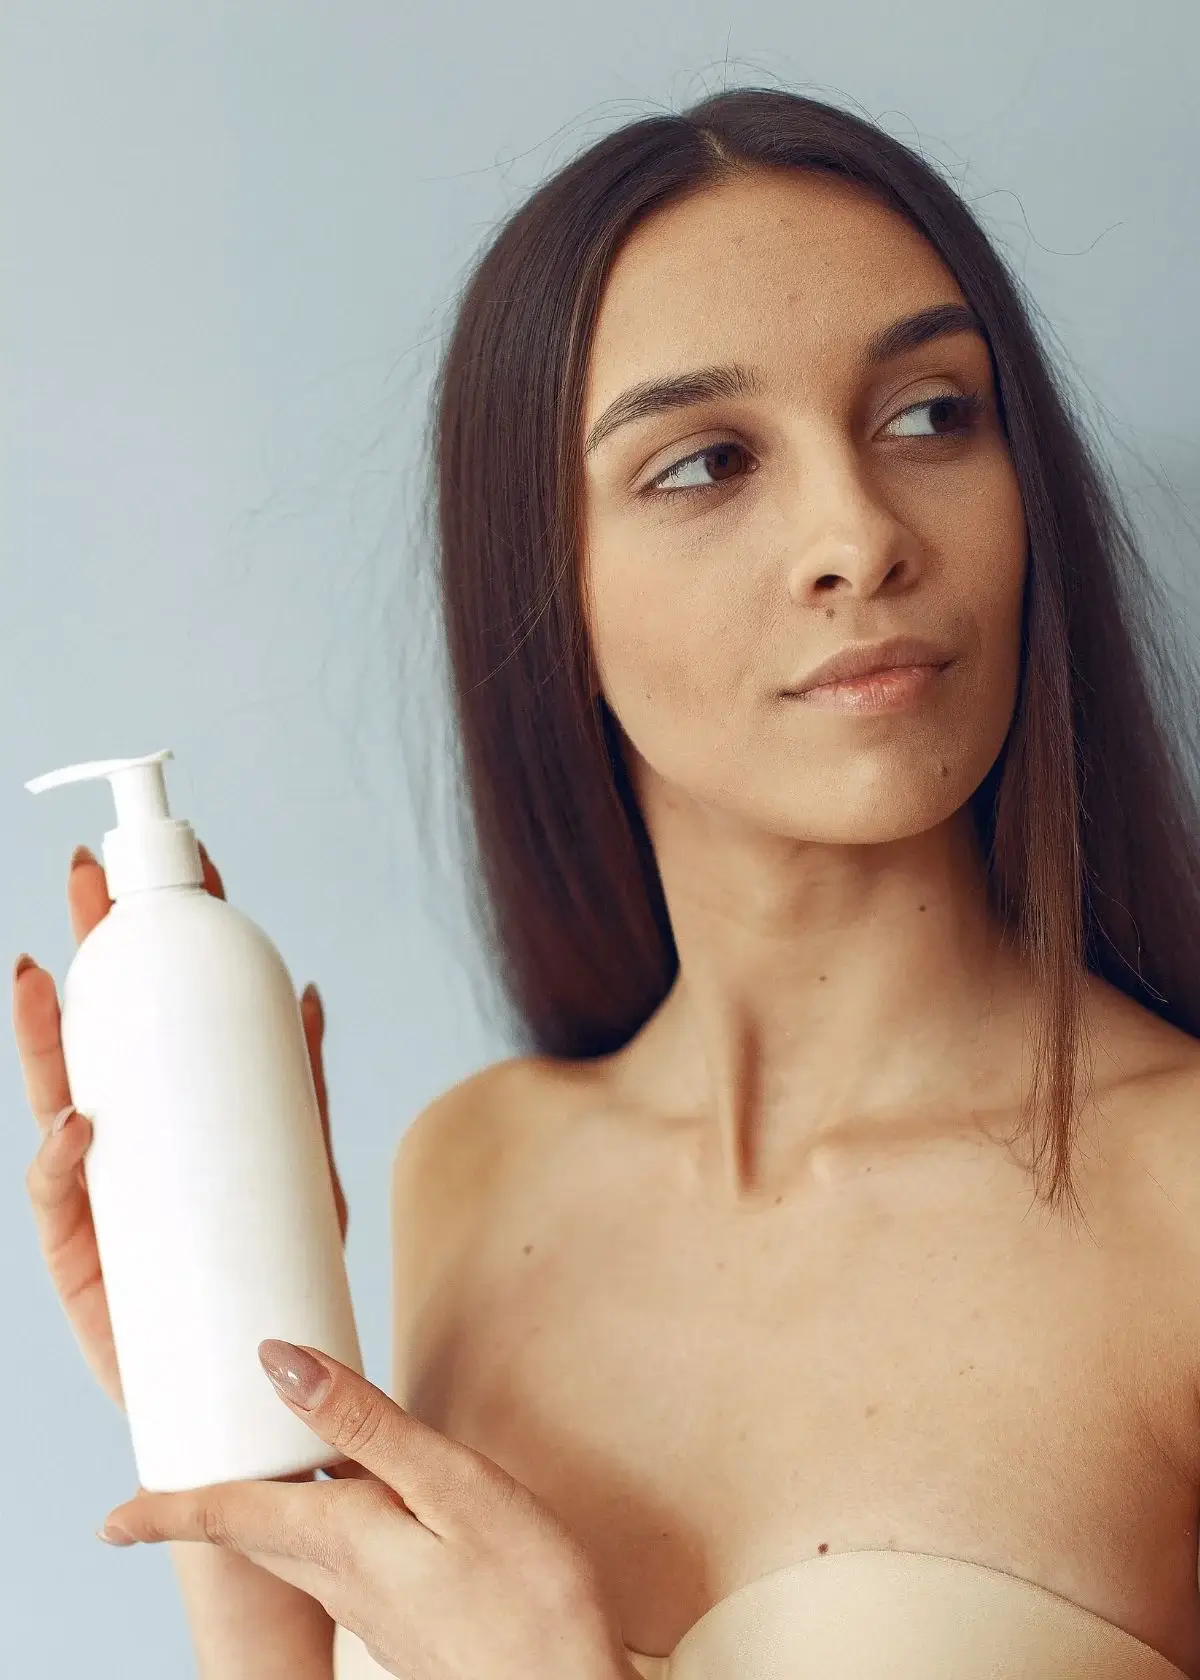 What is hard water, and how does it affect hair?